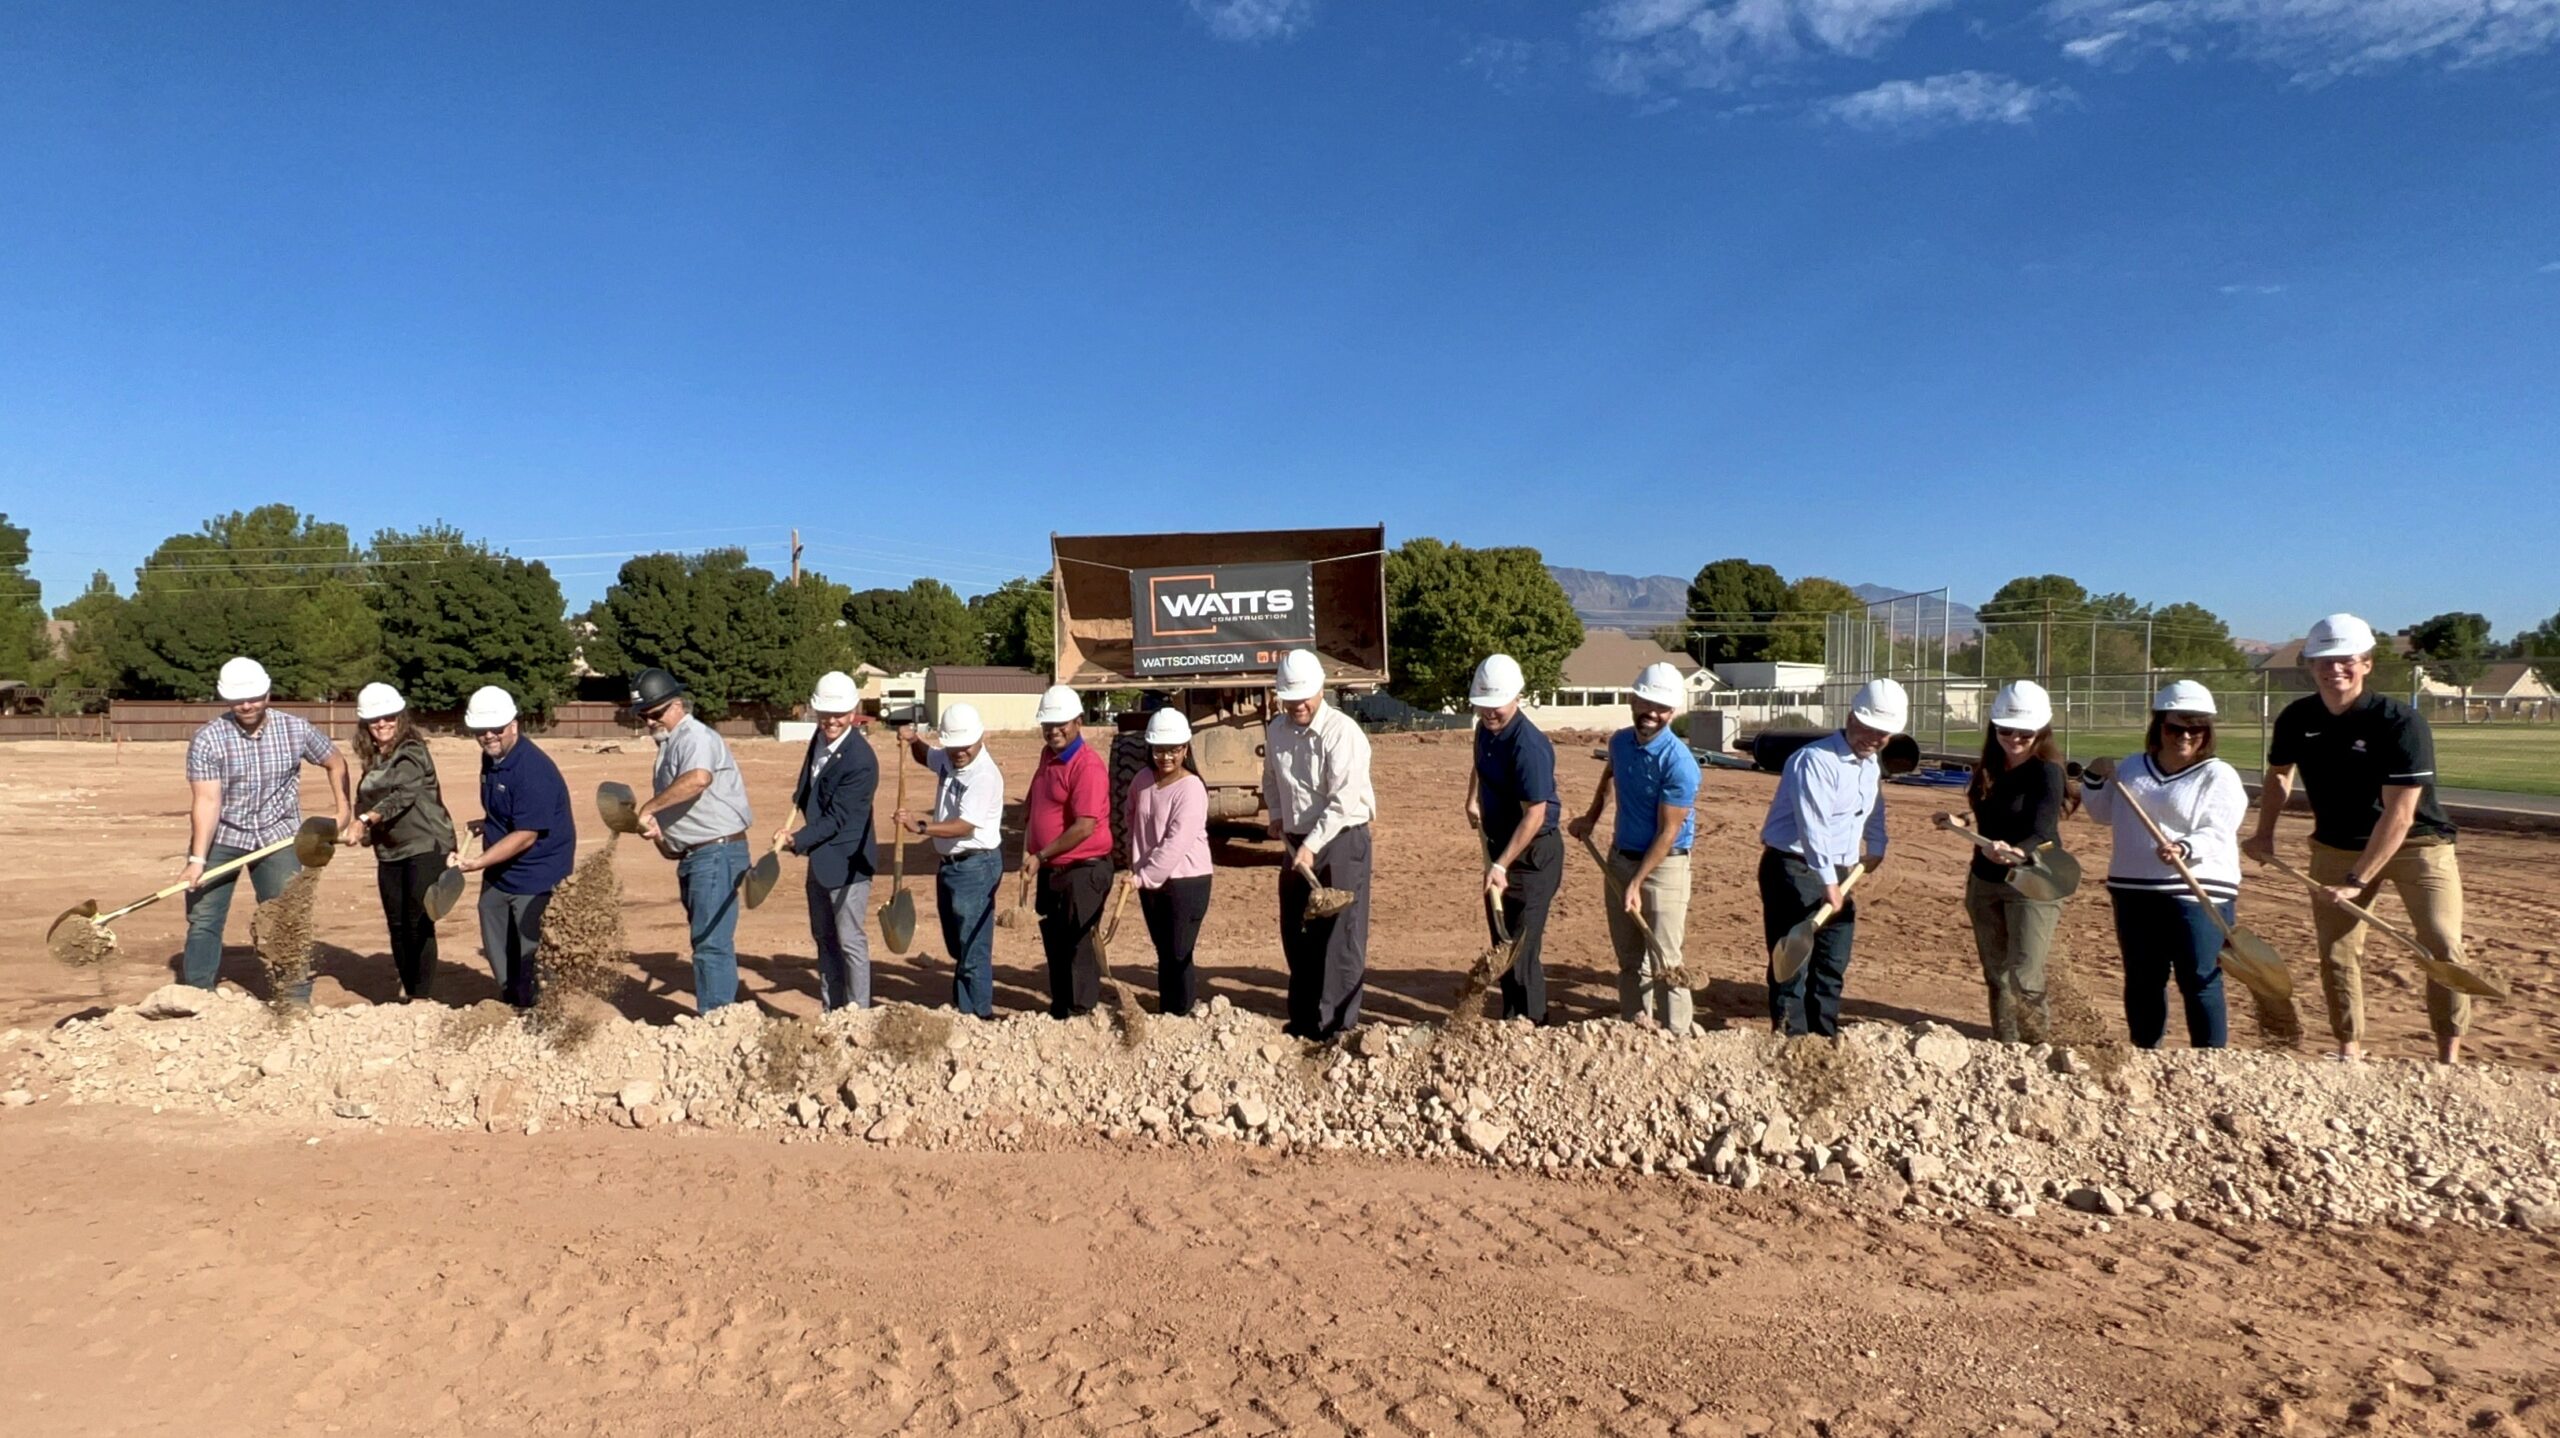 Watts representatives, the architect, owners, Mayor Staheli, and others from the community turn the dirt with gold shovels